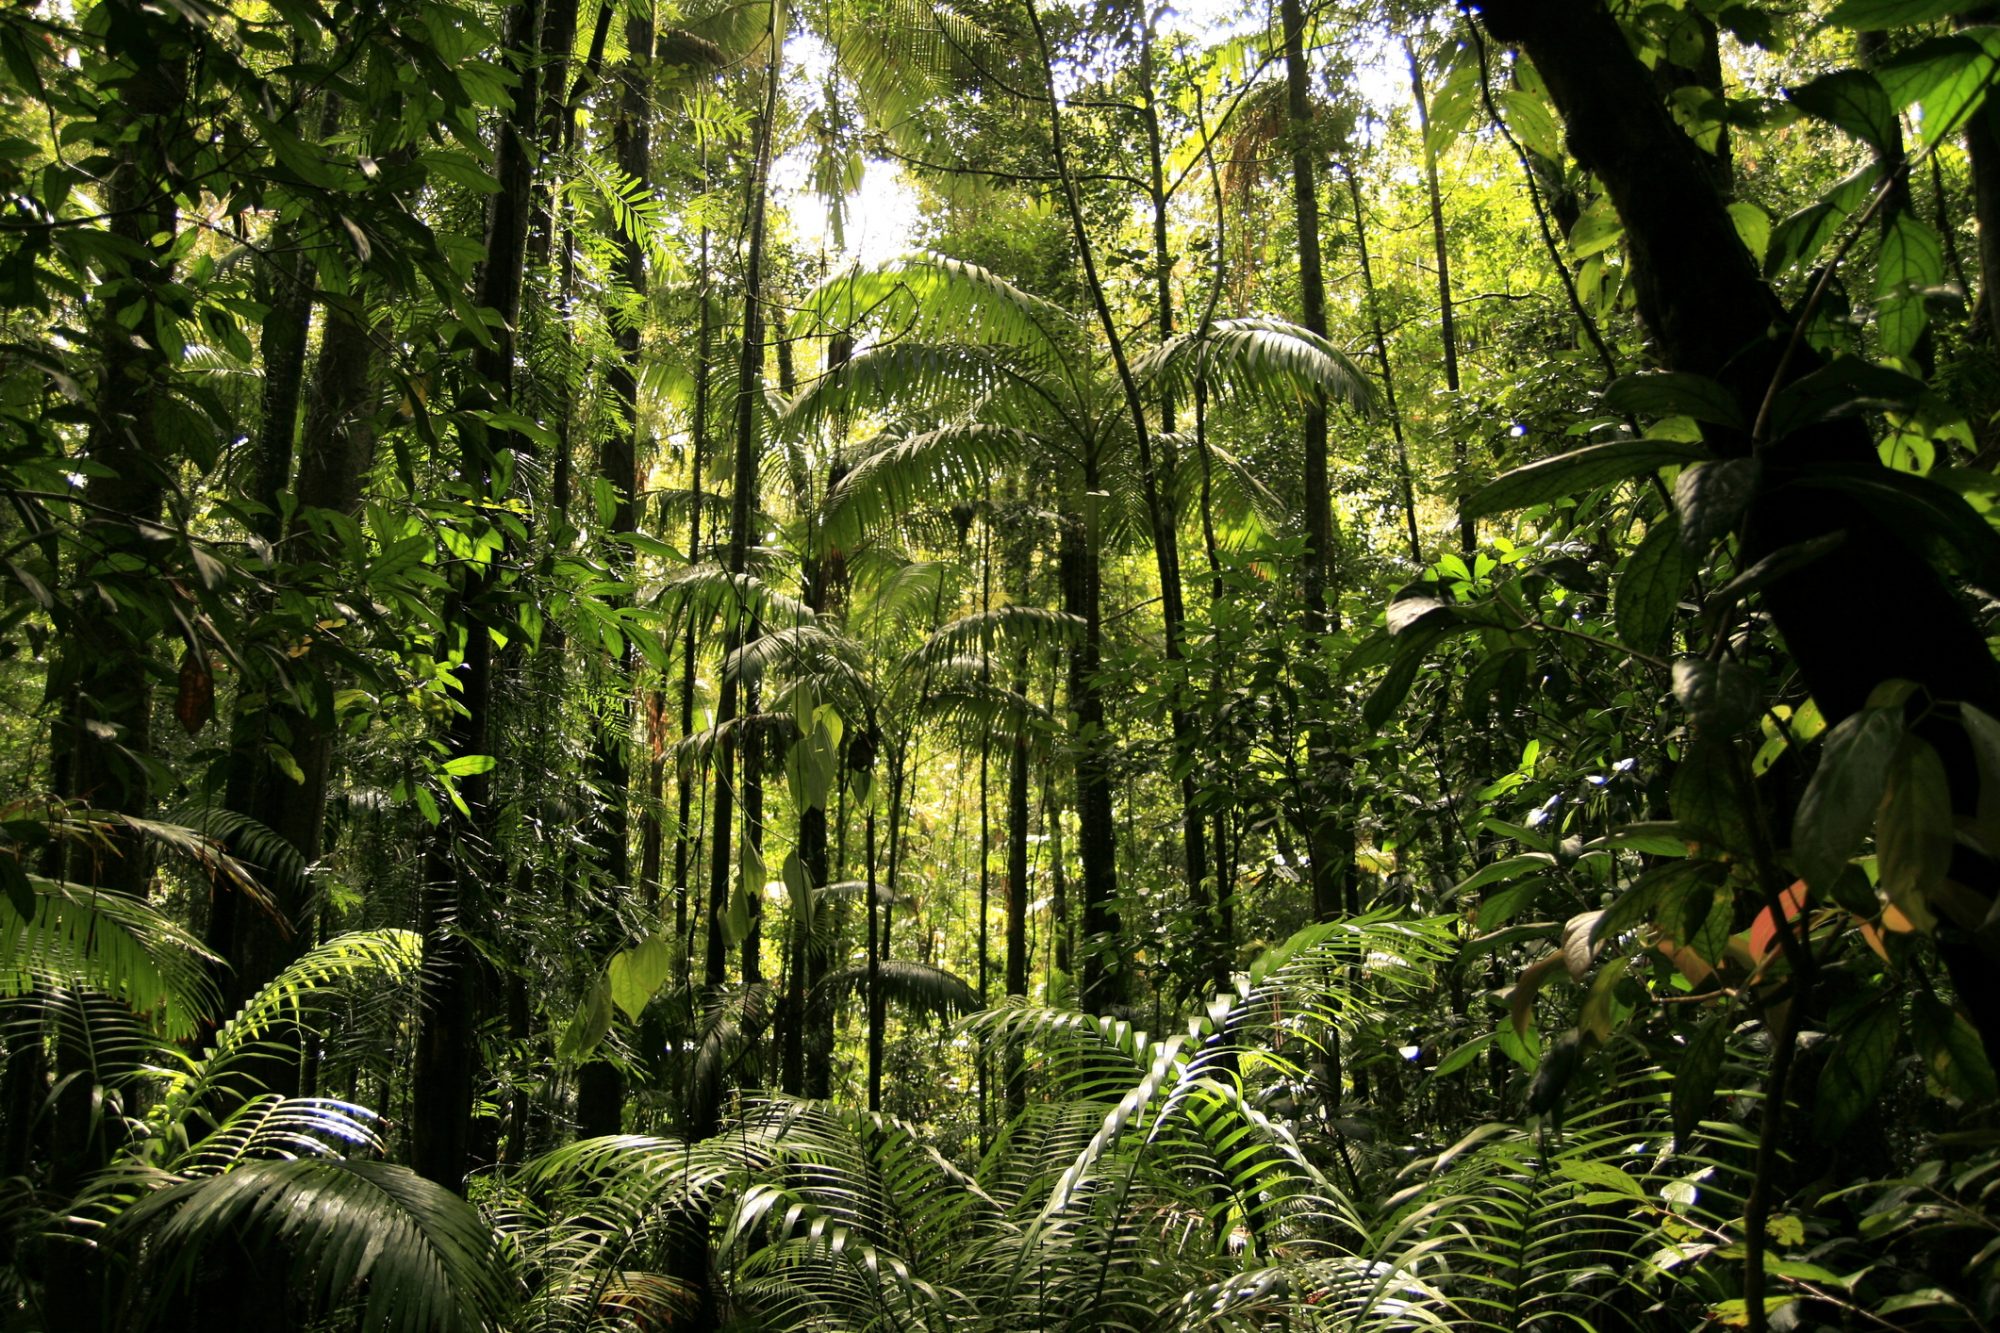 Natural regeneration can rapidly re-grow tropical forests